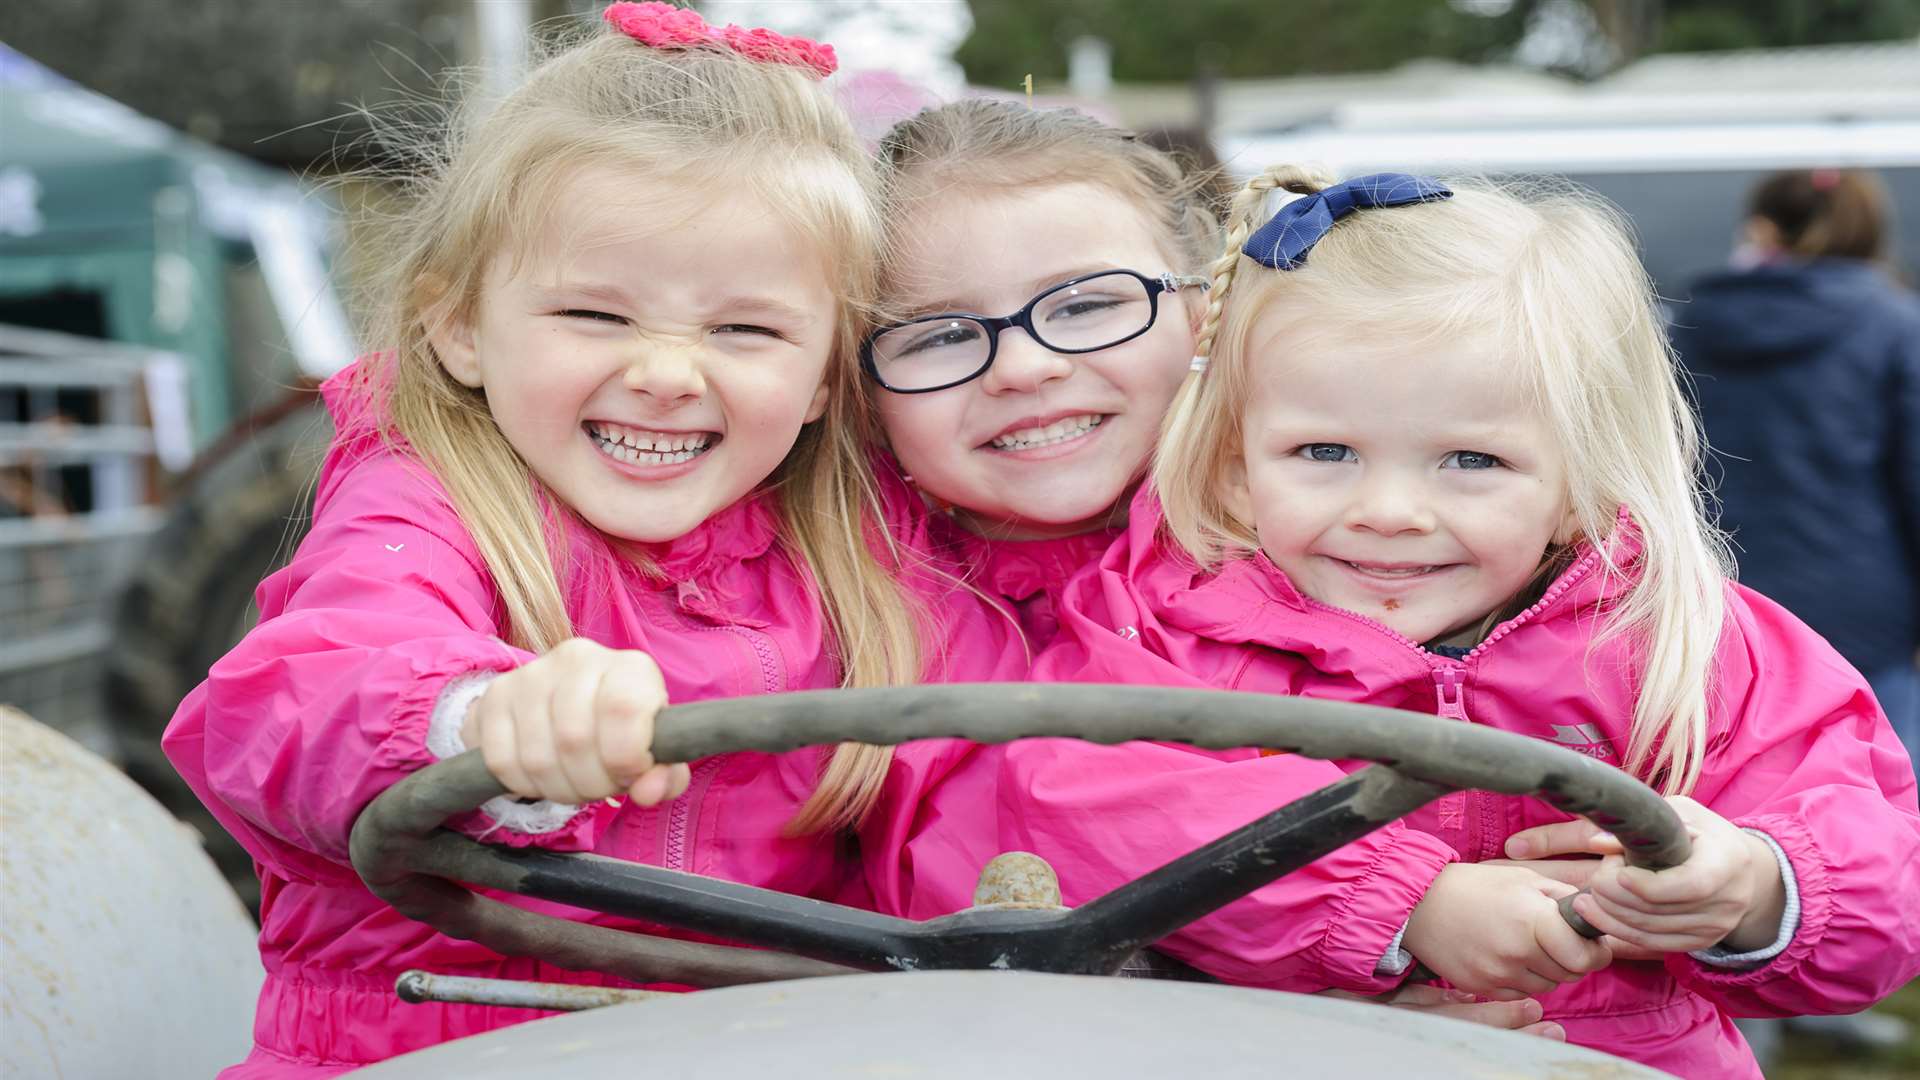 From left, Nancy Moore, 4, Chanelle Harwood, 5, and Daisy Moore, 2. Lambing Day, raising funds for the ellenor hospice, at Harvel House Farm, Harvel